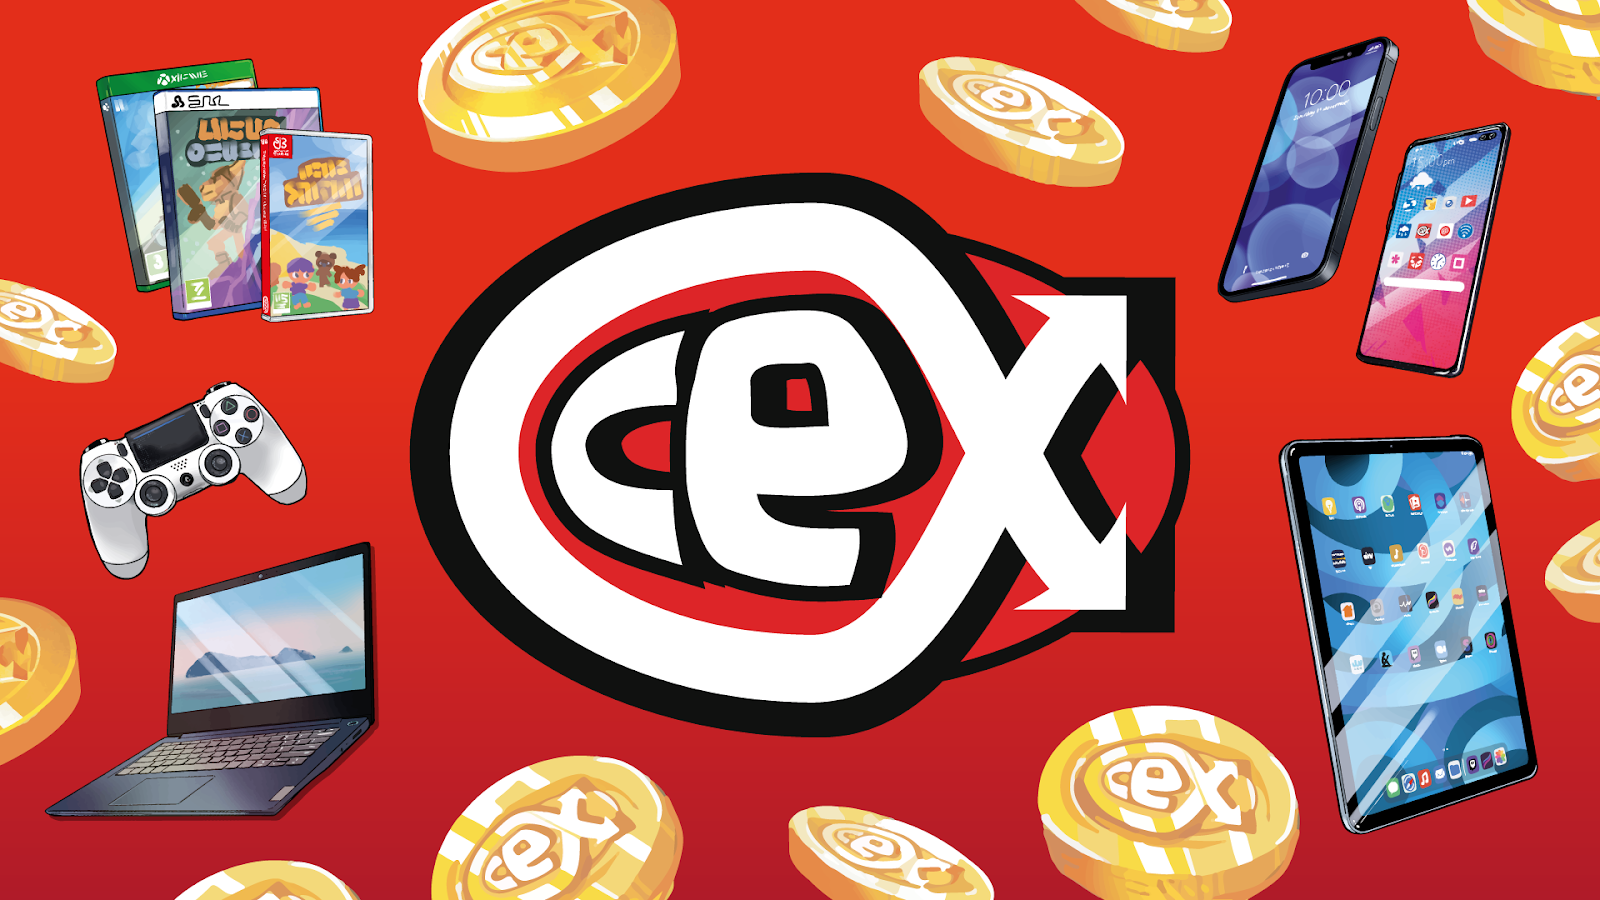 CeX Game Pricing Shocks Gamers